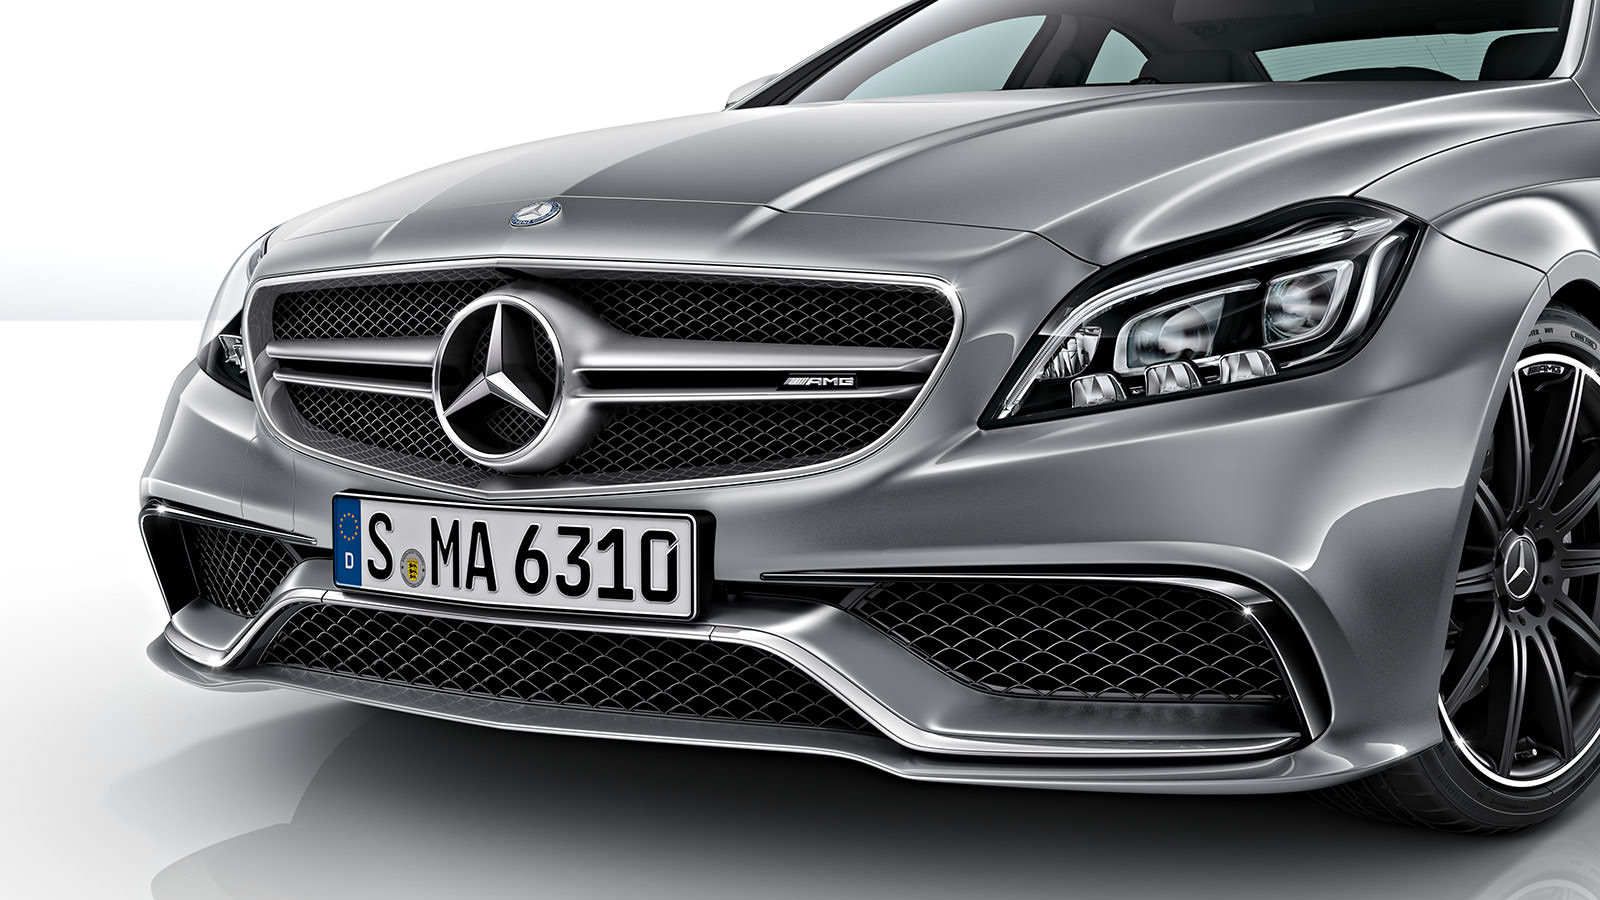 Mercedes Benz AMG CLS 63 front view